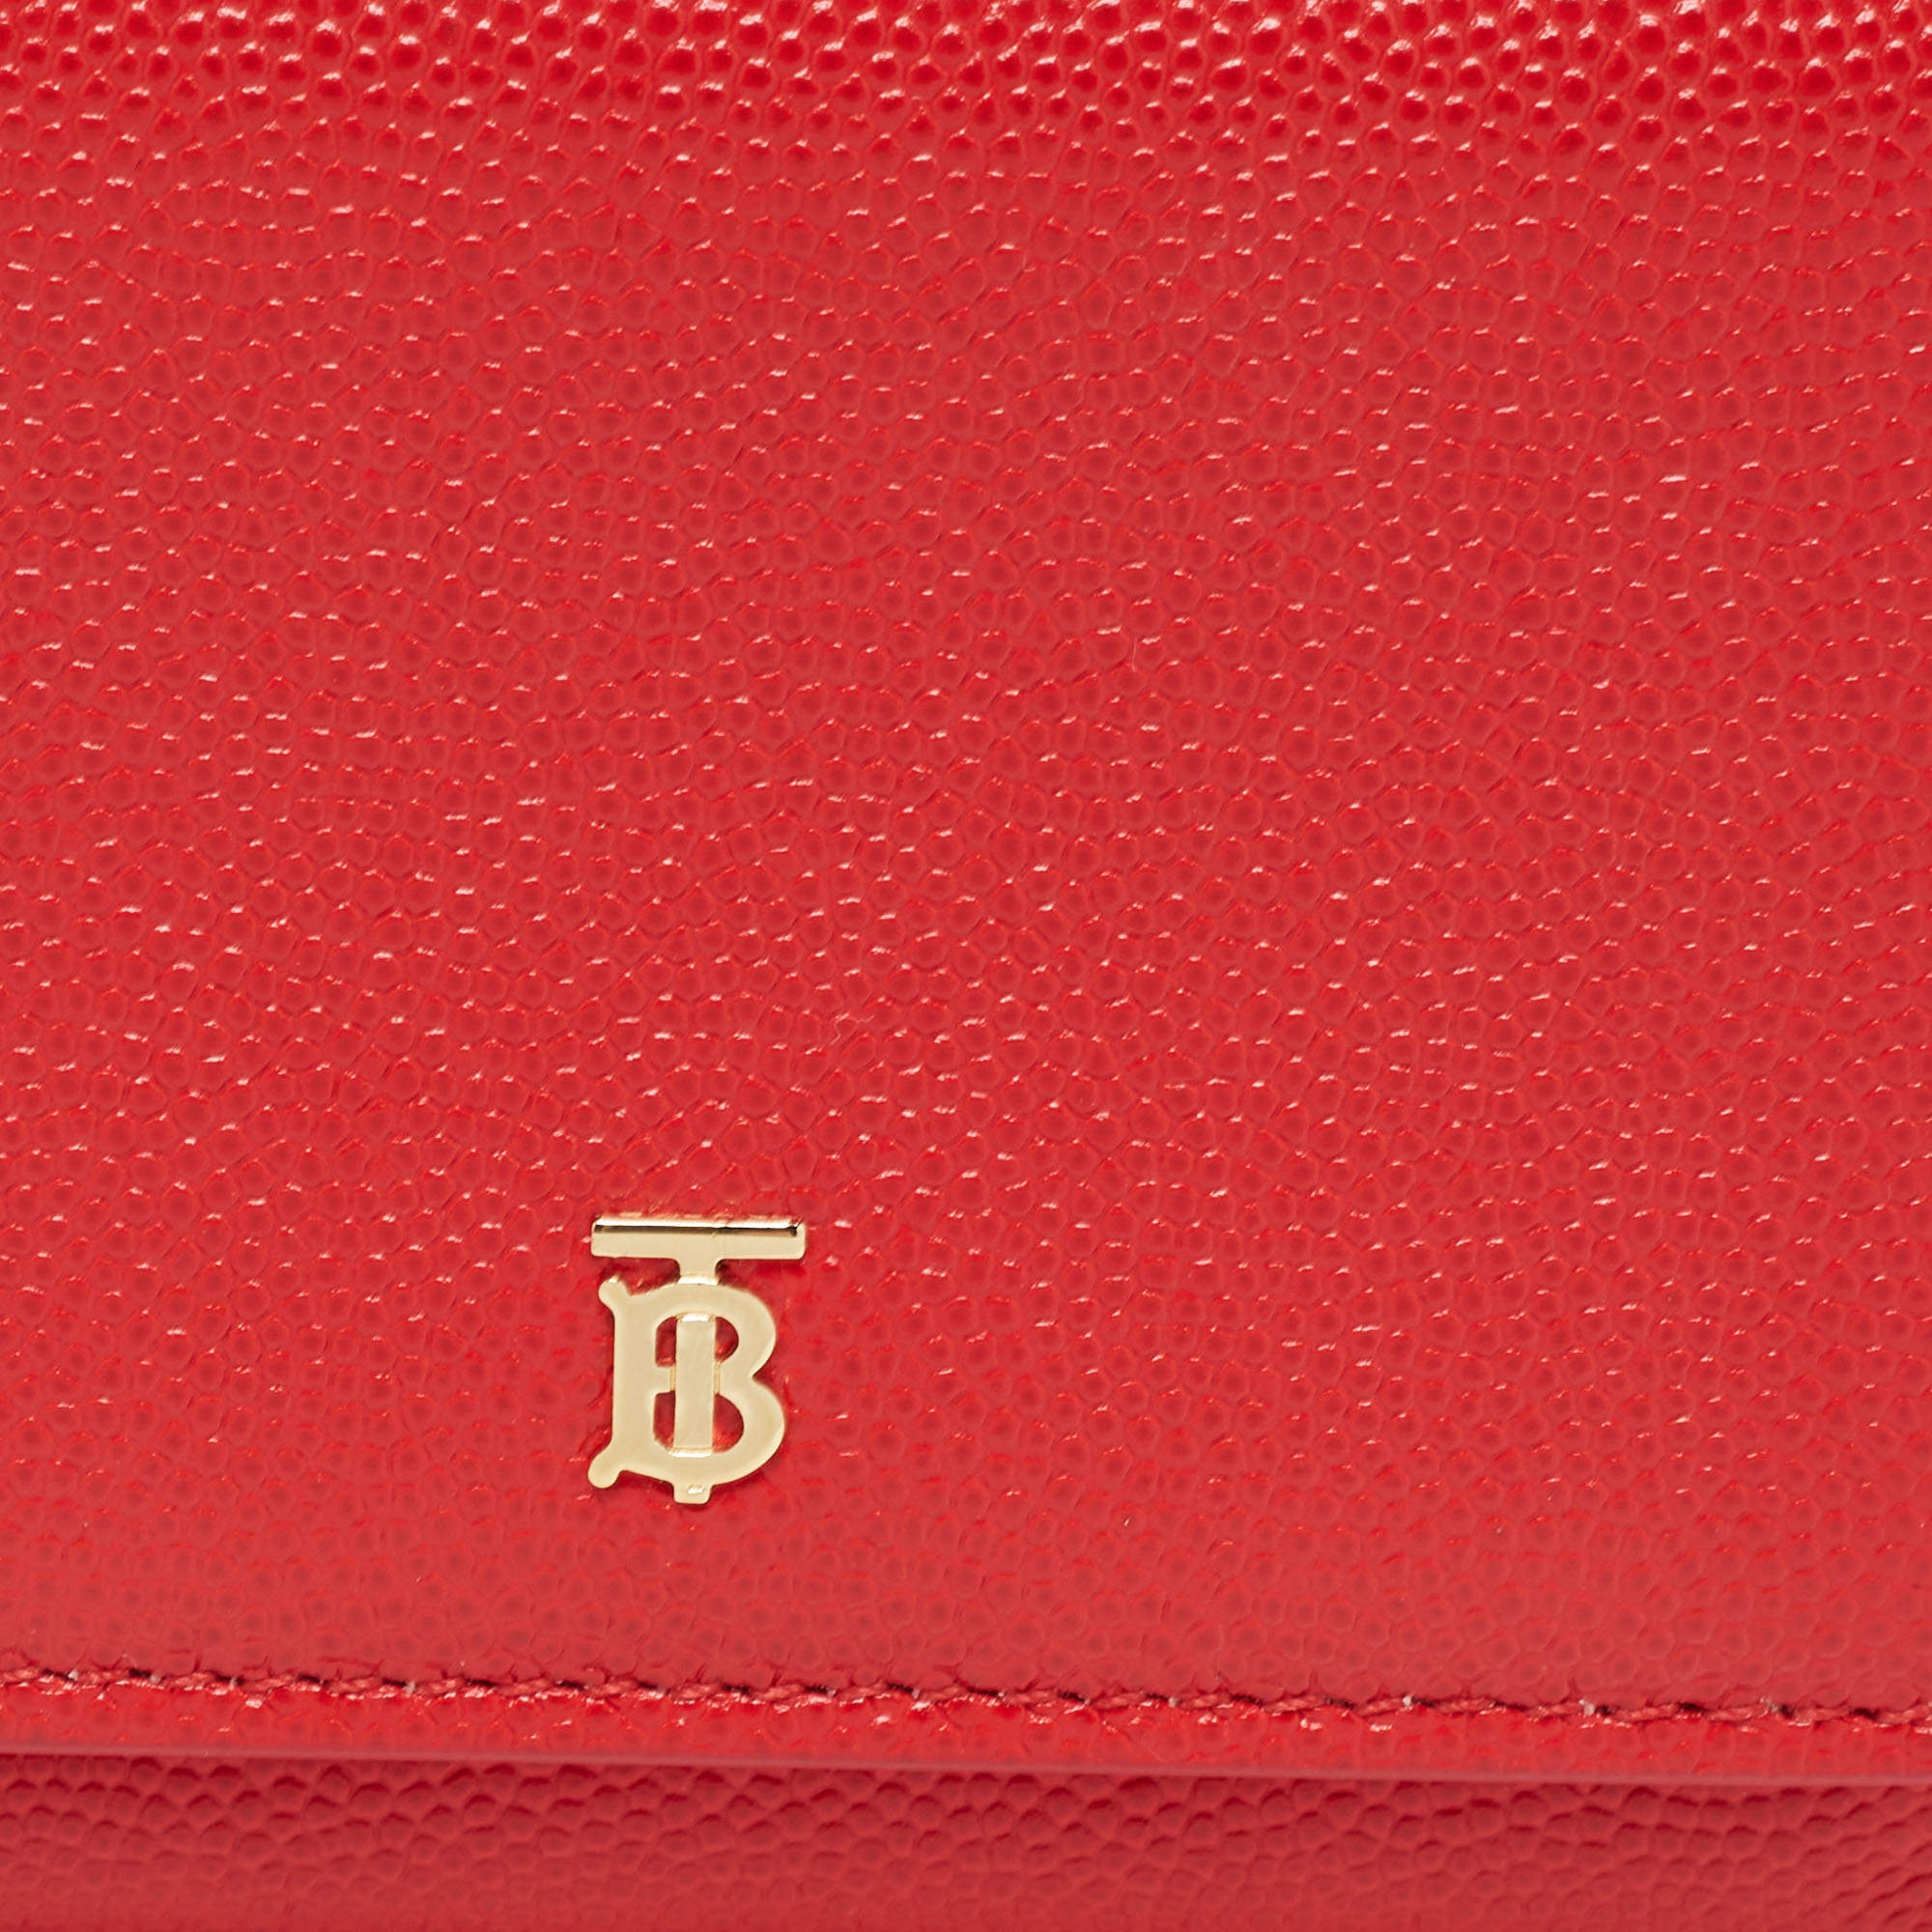 Leather wallet Burberry Red in Leather - 29345311